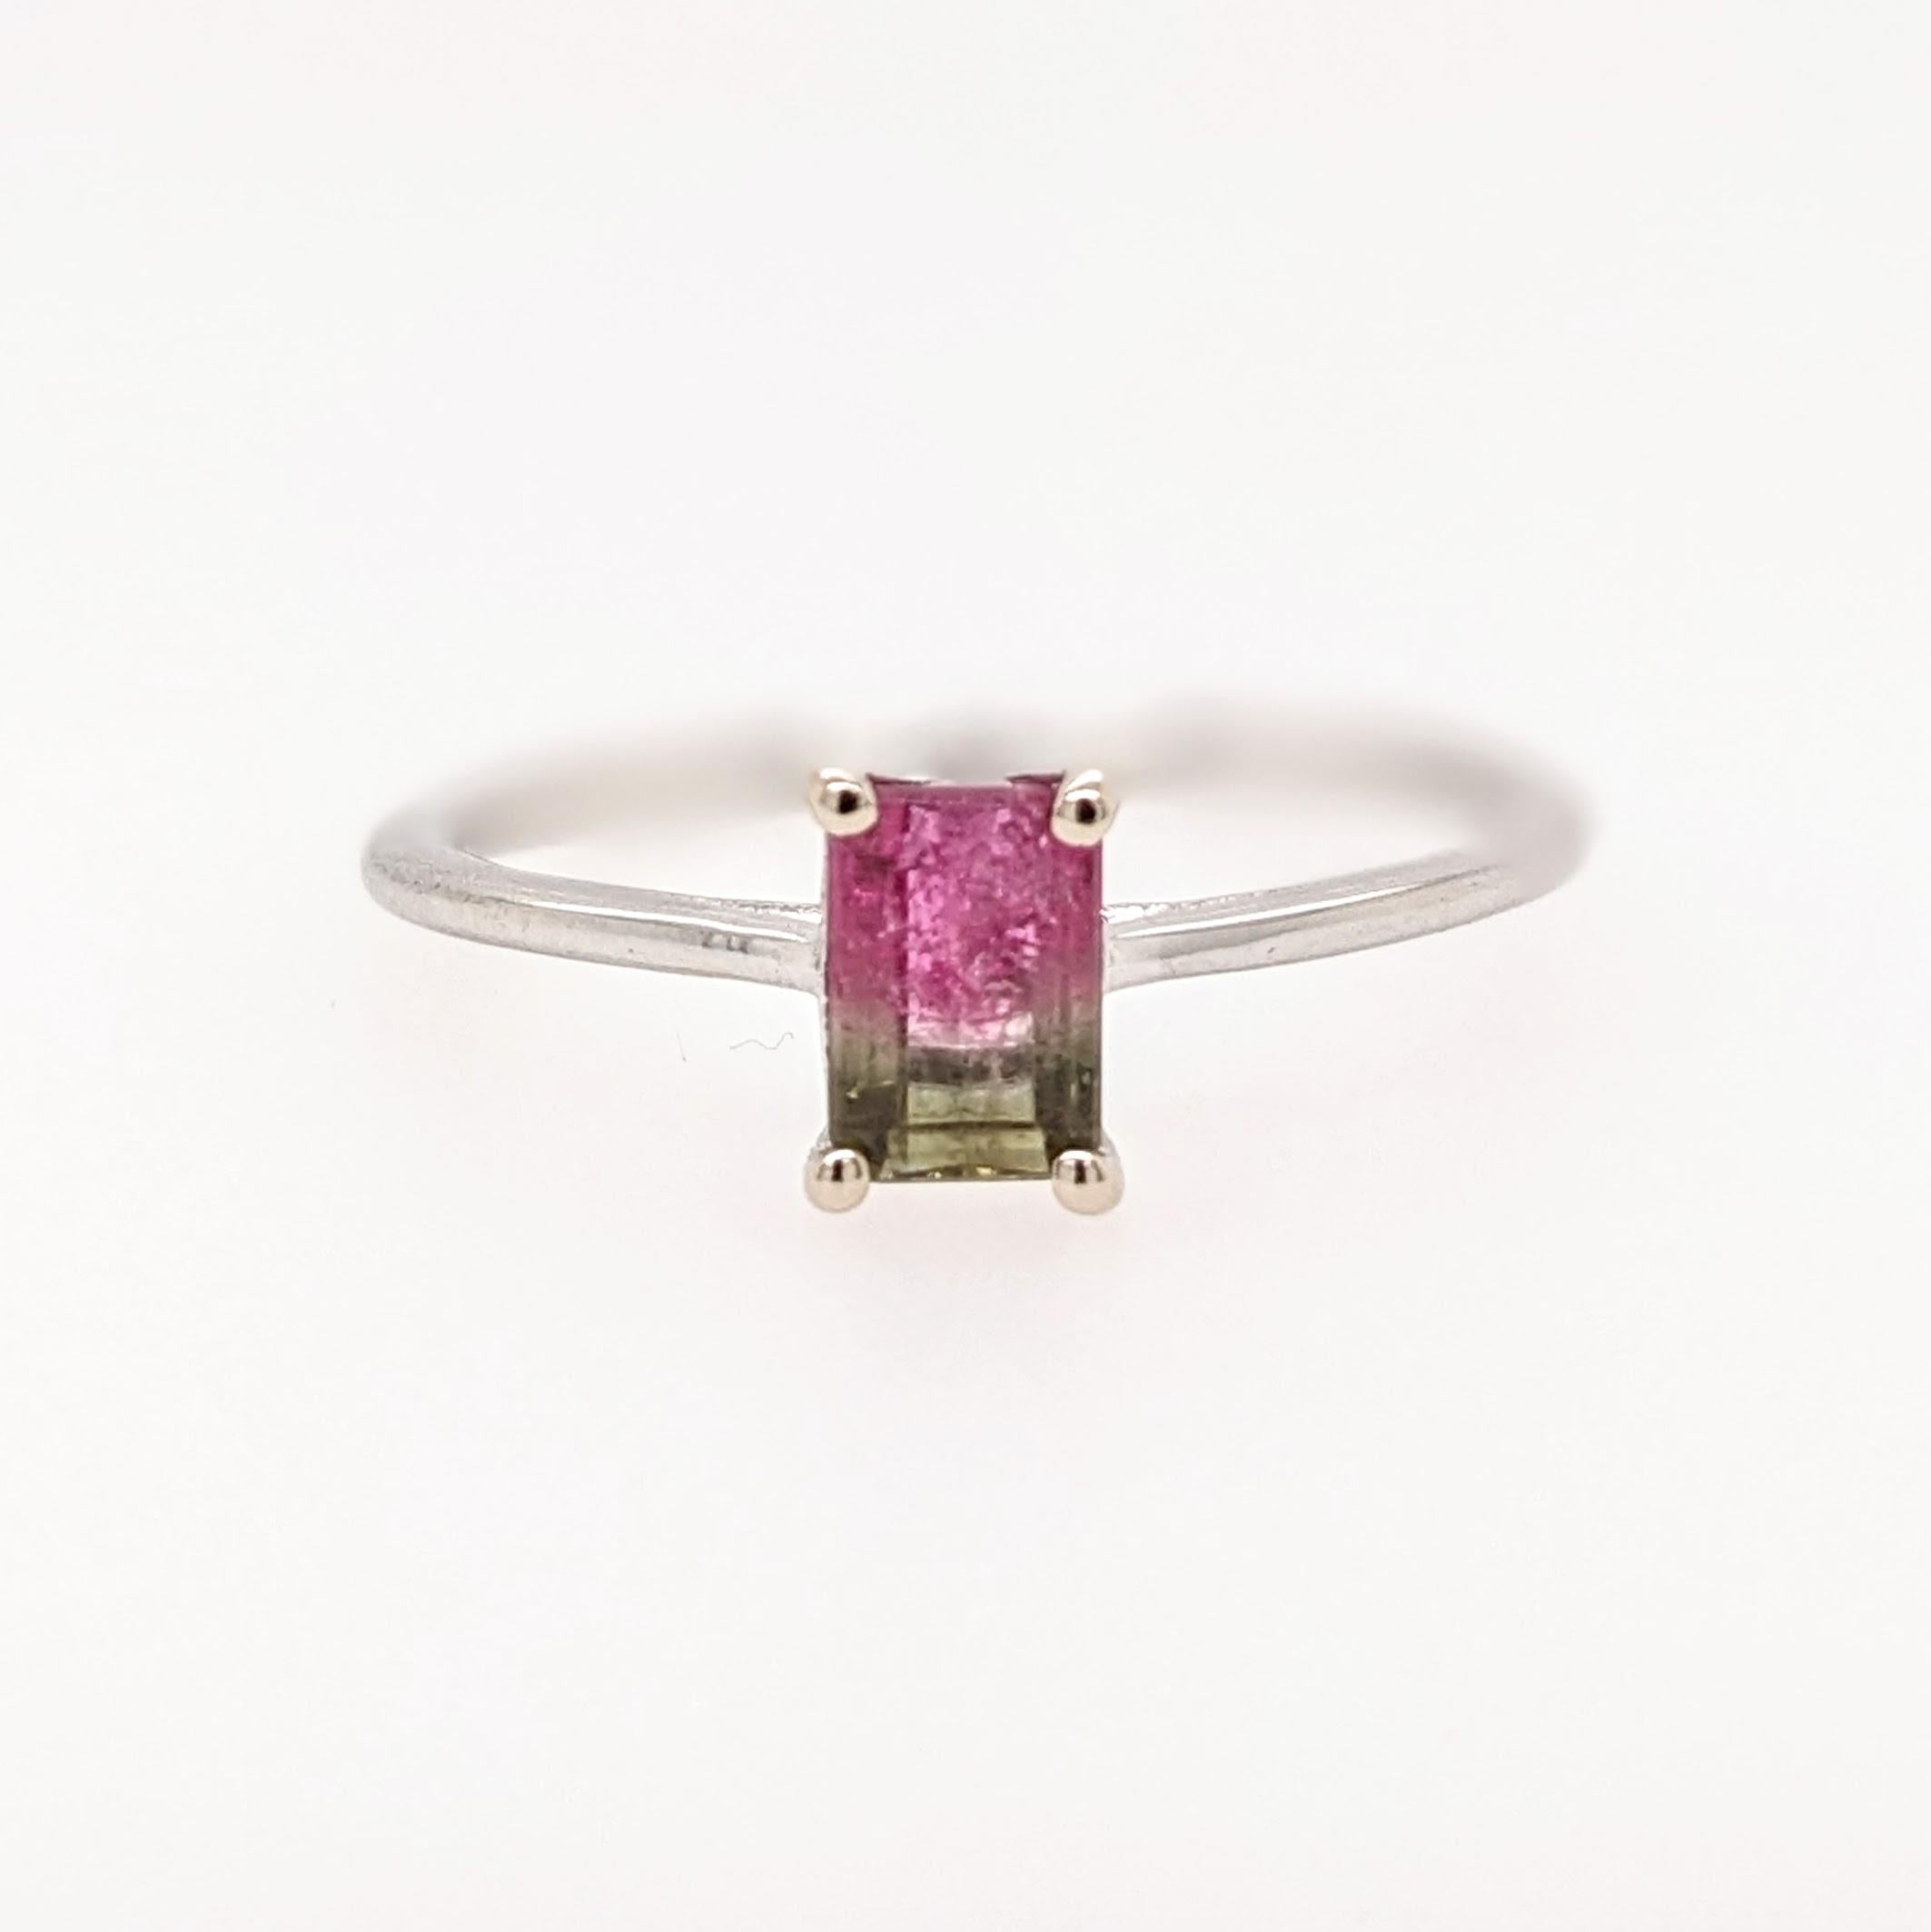 Bi-Color Tourmaline Solitaire Ring in Solid 14K White Gold Emerald Cut 6x4mm